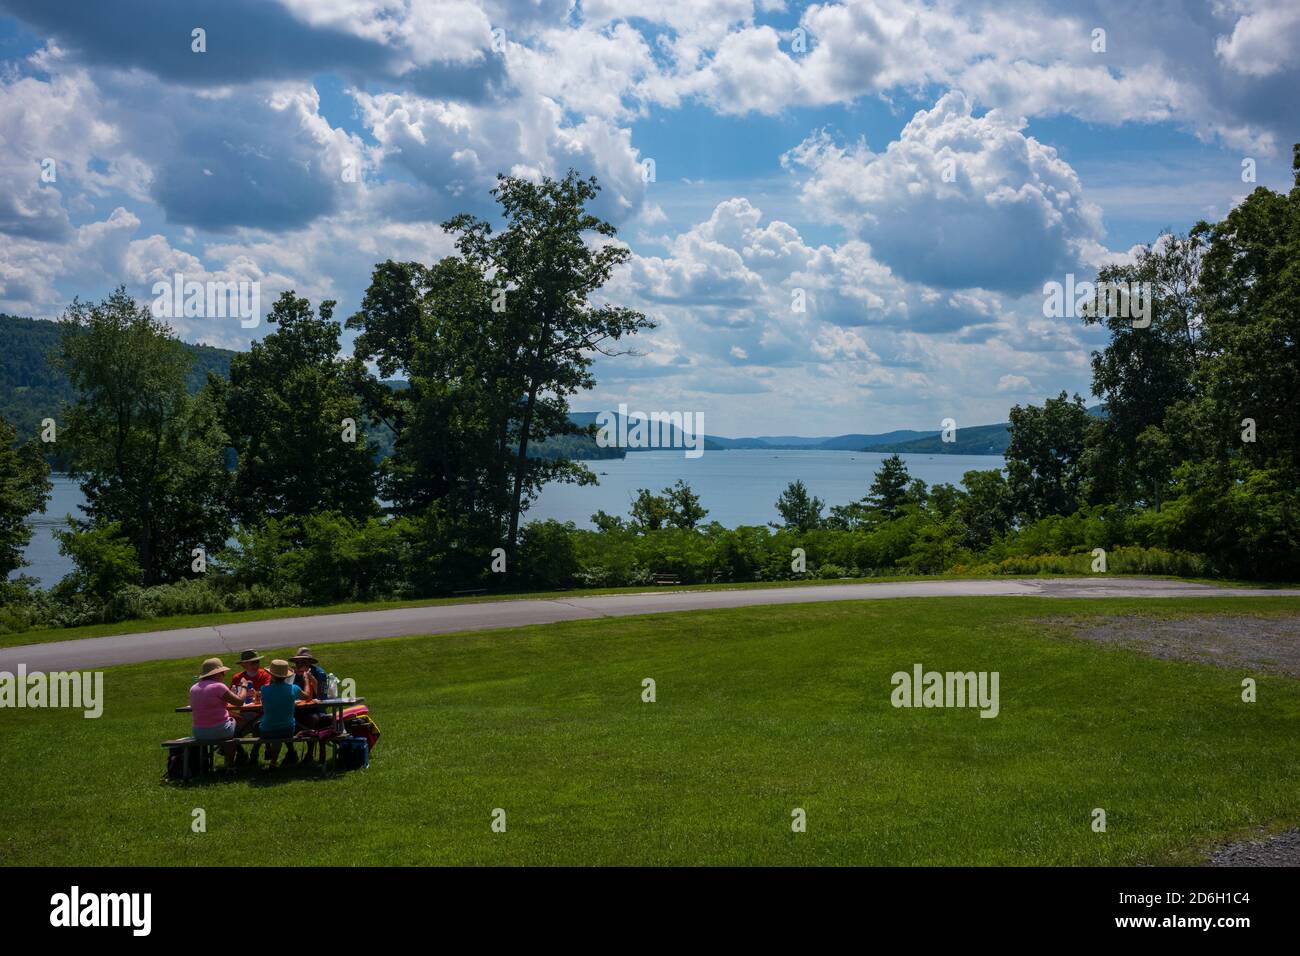 Cooperstown, NY/USA - Aug 15, 2020: Two elderly couples enjoy their lunch at a picnic table while visiting Glimmerglass State Park overlooking Otsego Stock Photo